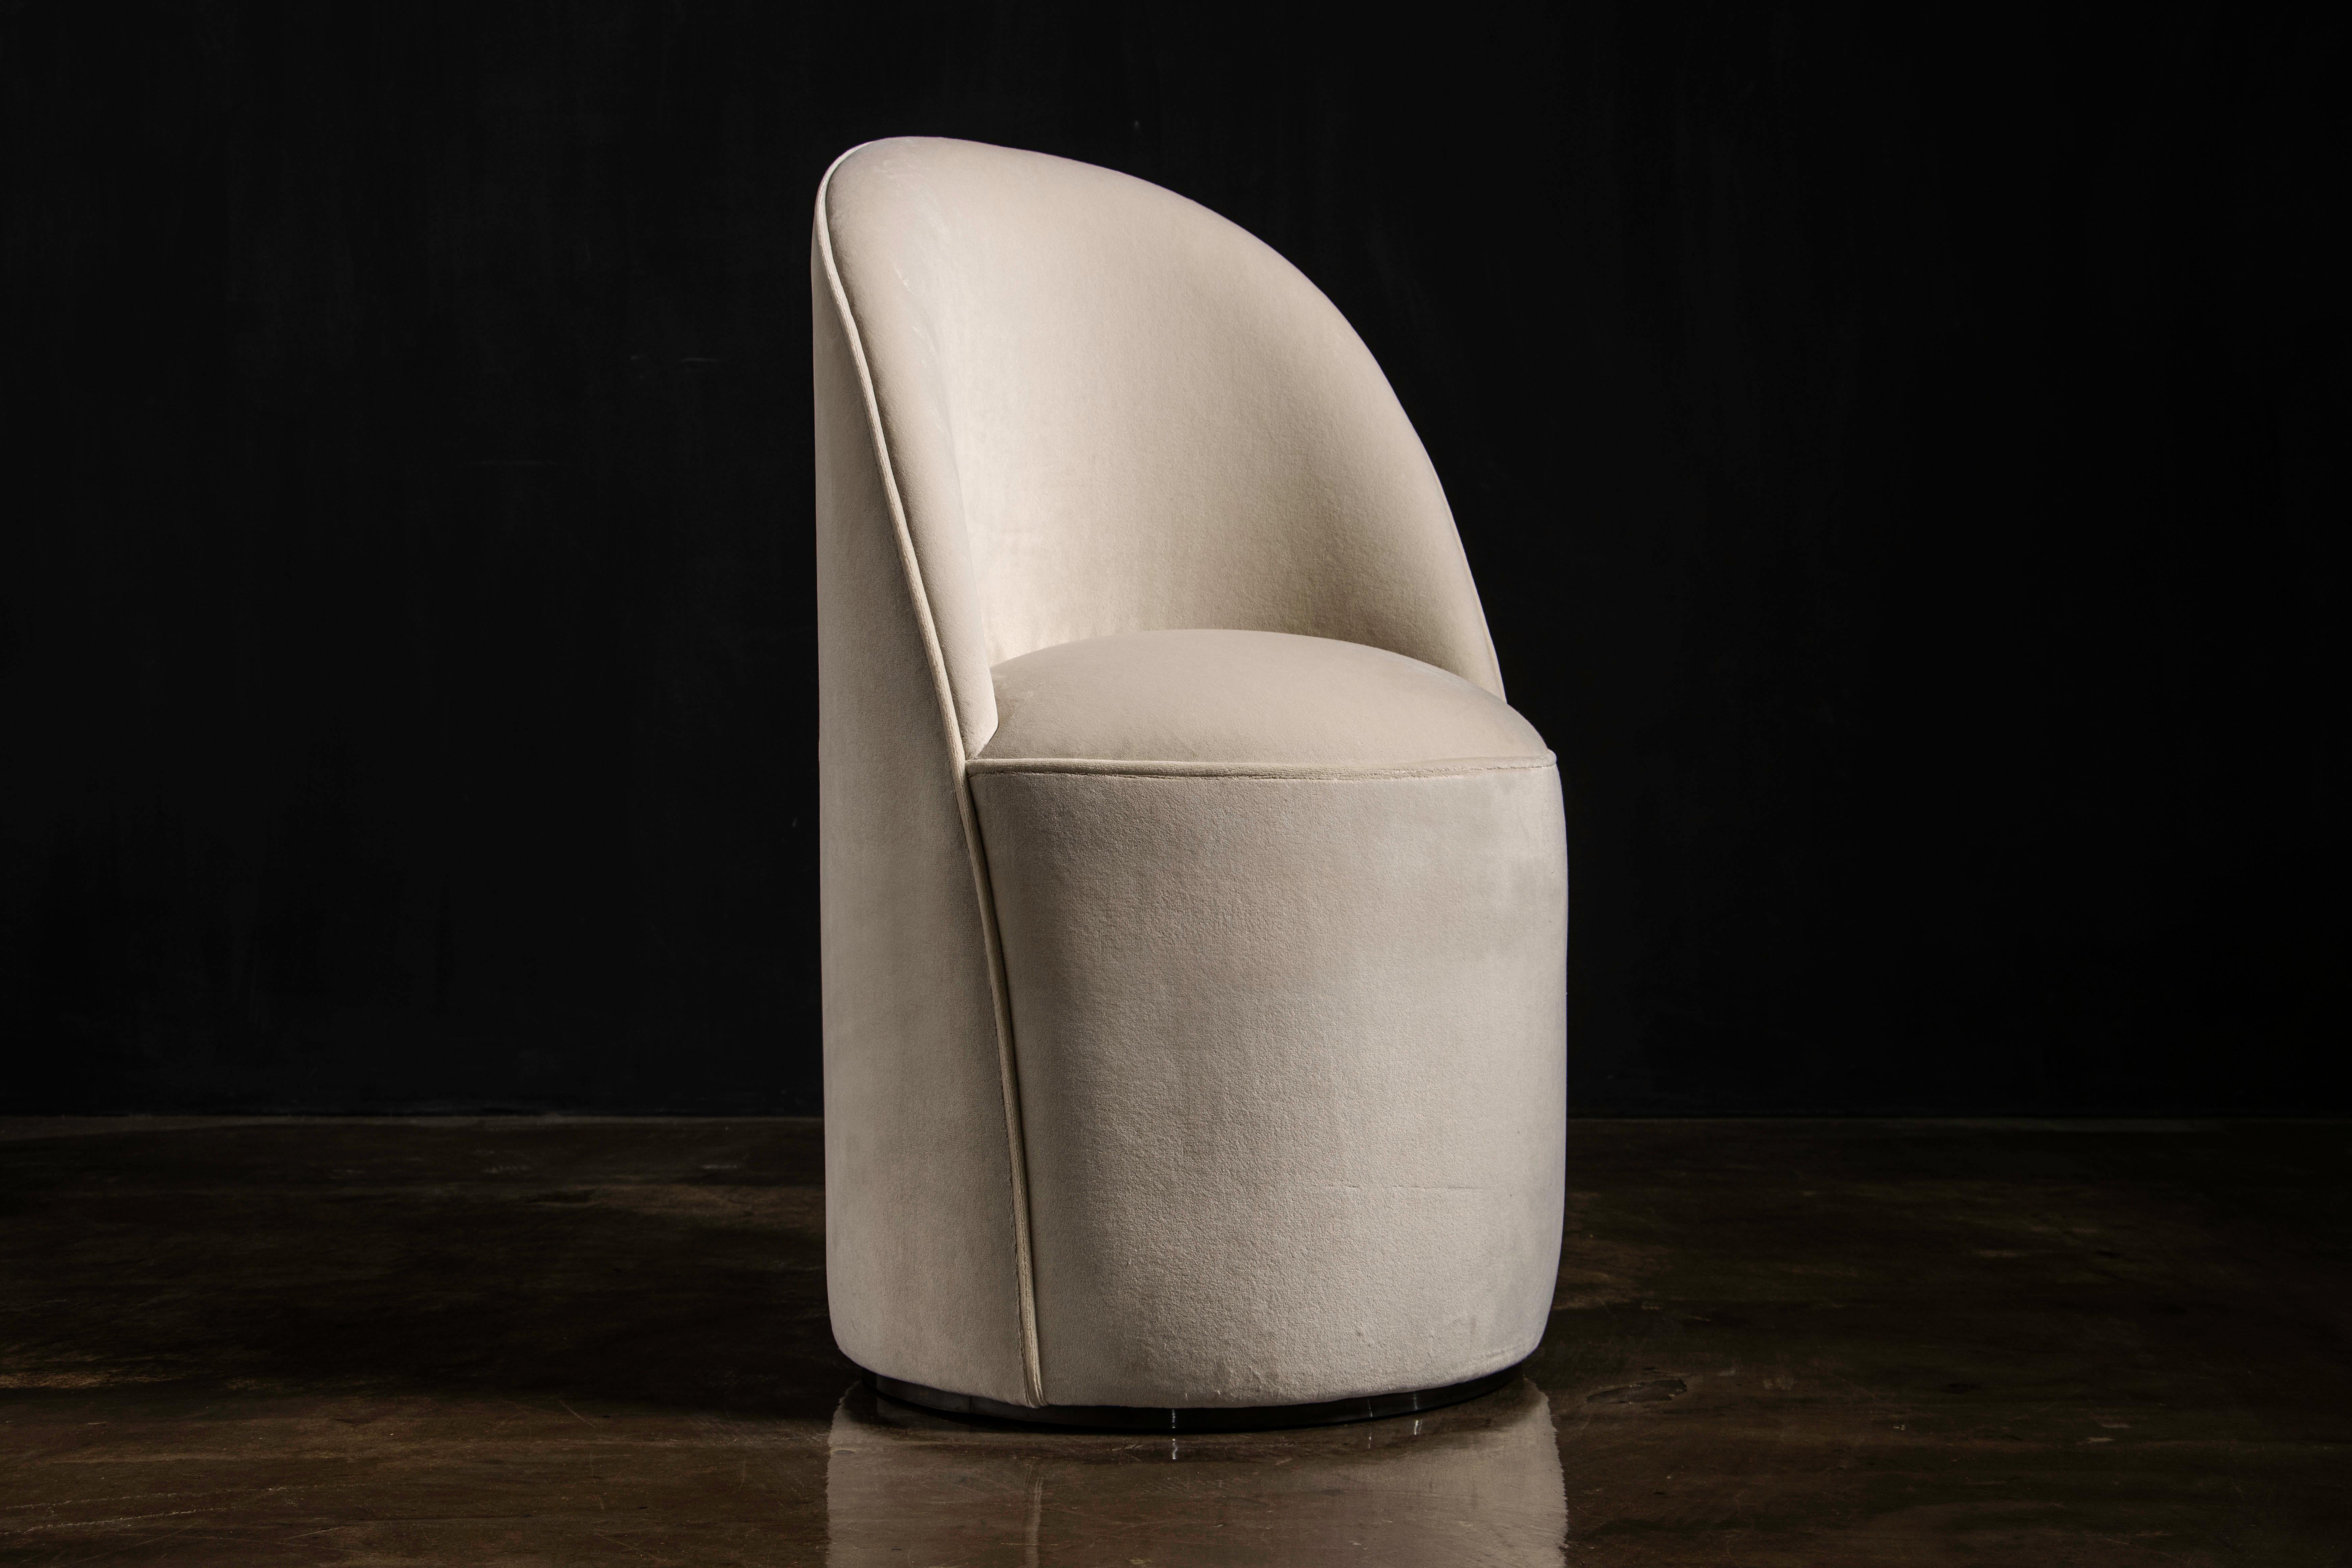 Elisabetta Modern Swivel Dressing Chair in Fabric or Leather from Costantini

This elegant, modern yet timeless dressing chair features a swivel and can be upholstered in the material of your choice.  Choose from standard fabric, leather or